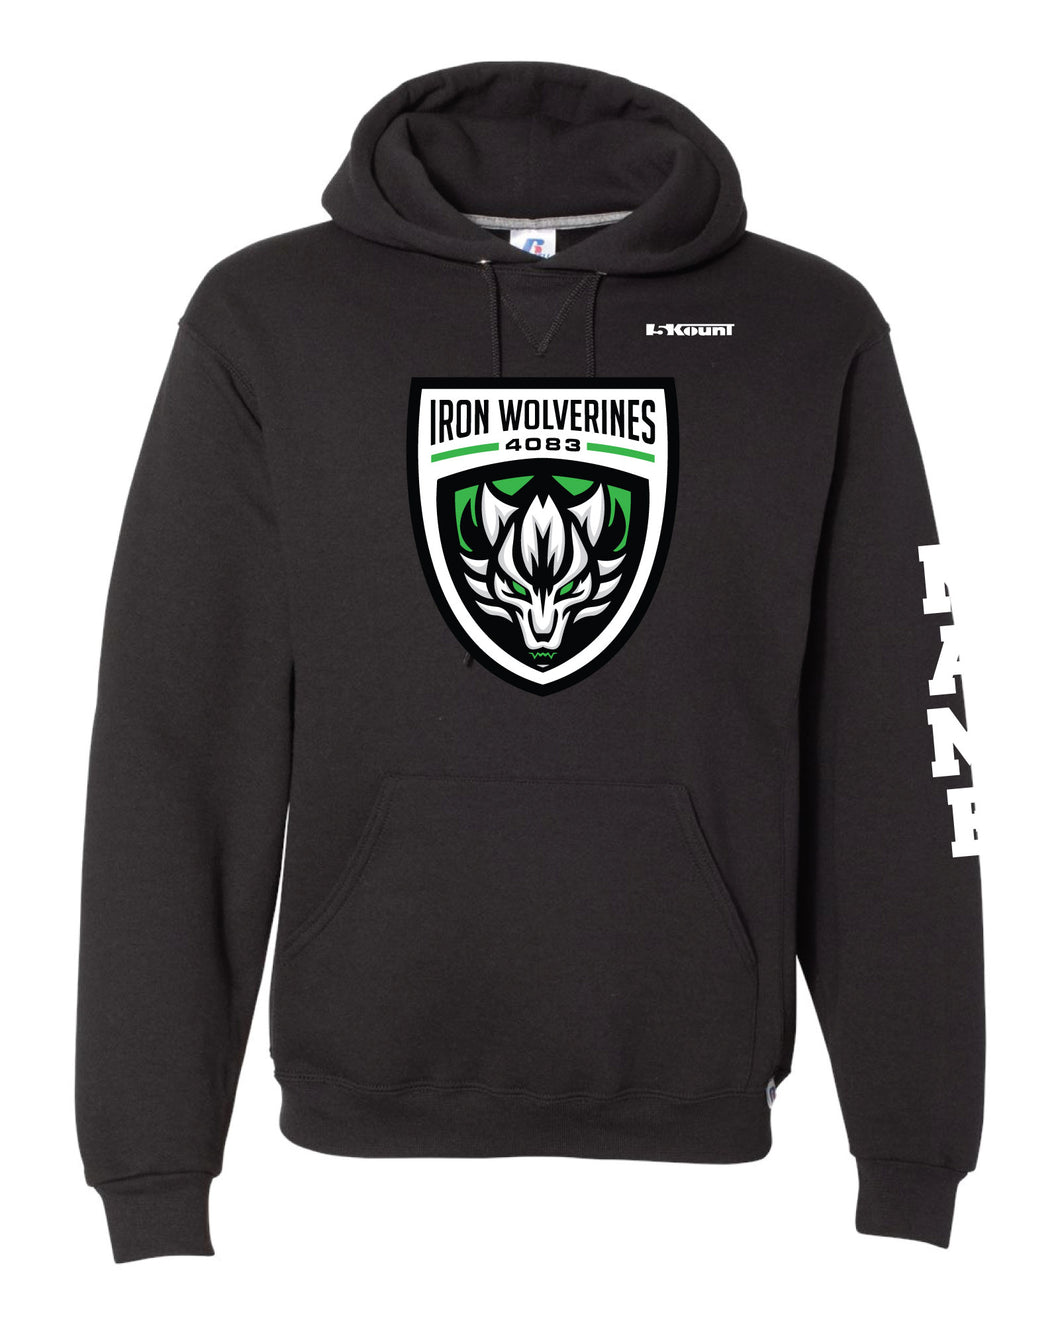 Iron Wolverines Russell Athletic Cotton Hoodie - Black - 5KounT2018